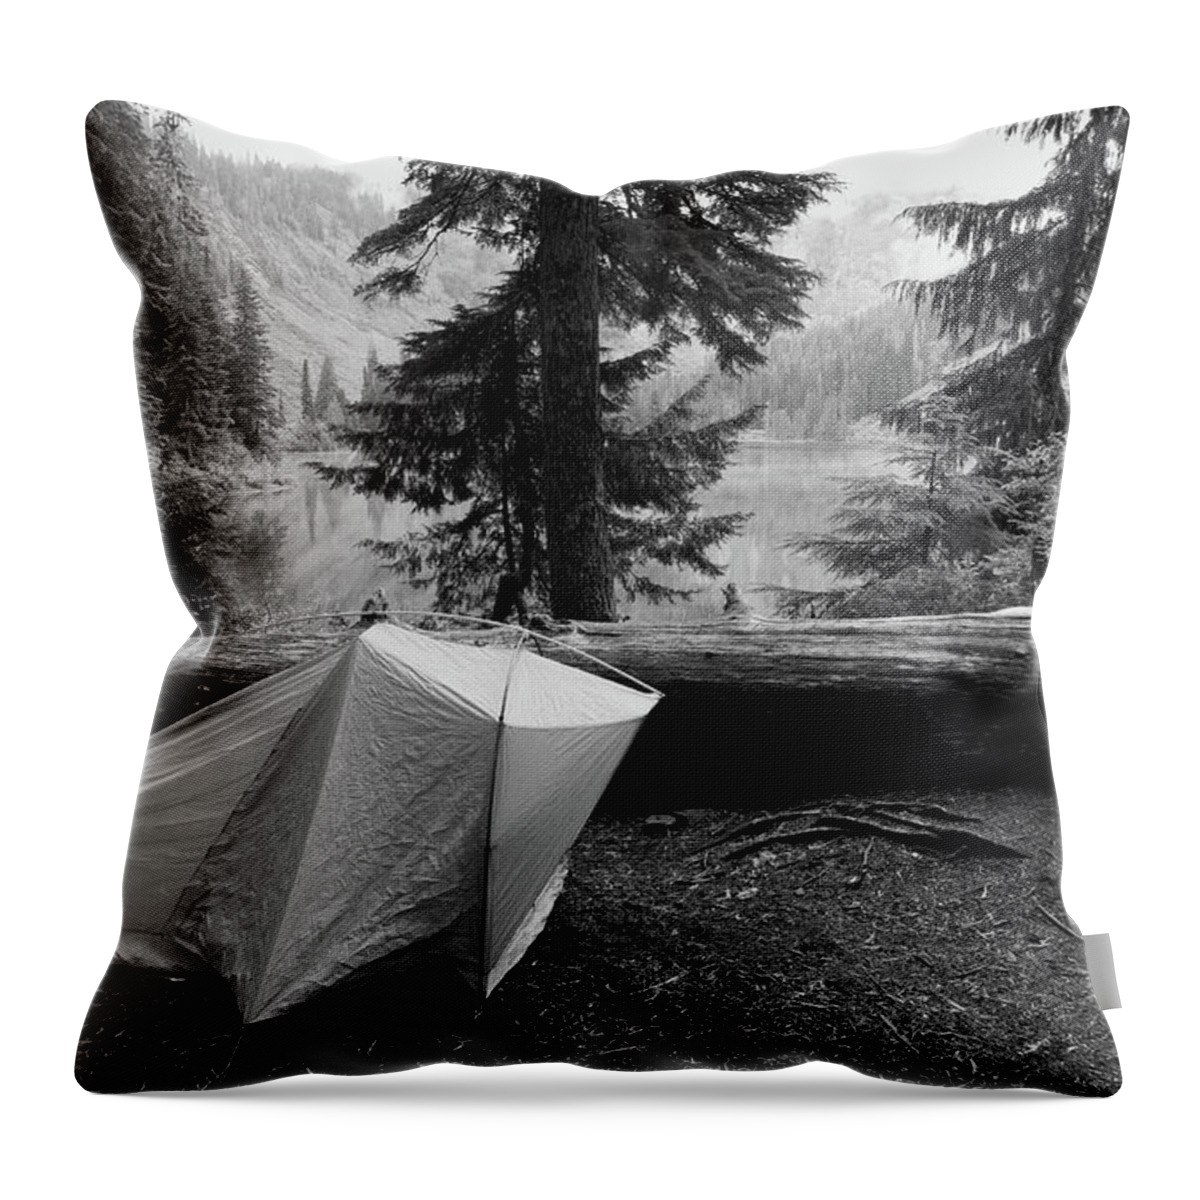 Tent Throw Pillow featuring the photograph Camping in the Alpine Wilderness by Chris Pappathopoulos